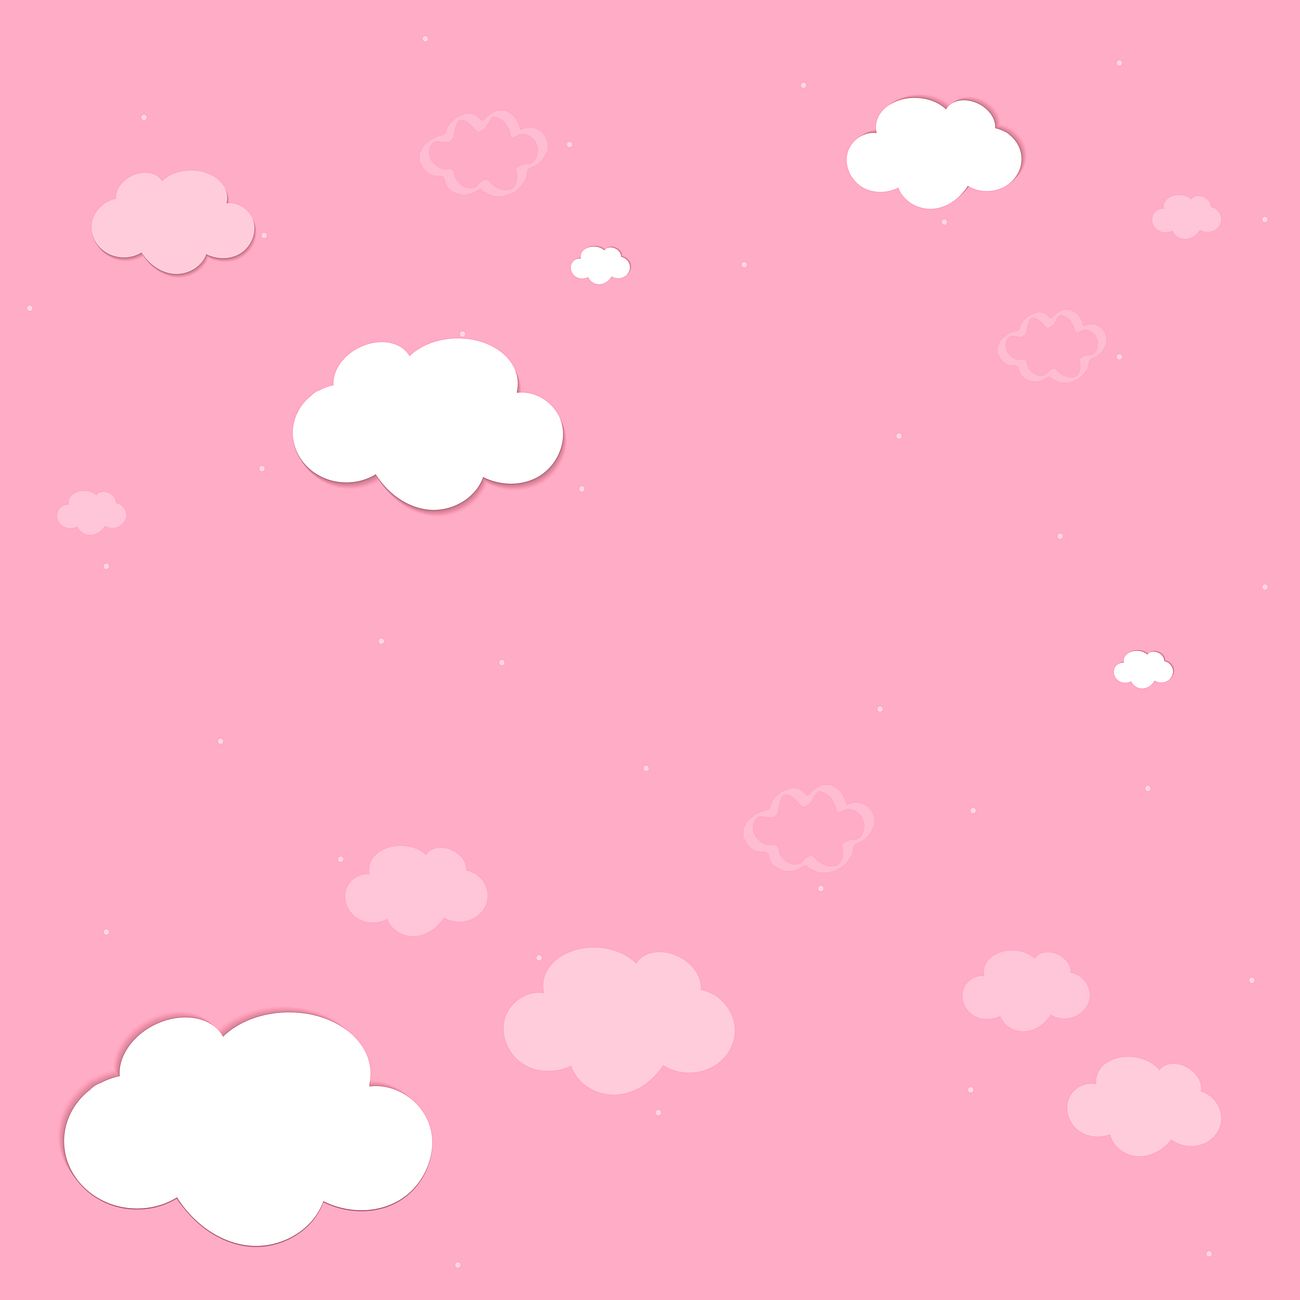 Cloudy Pink Sky Background Free Vector